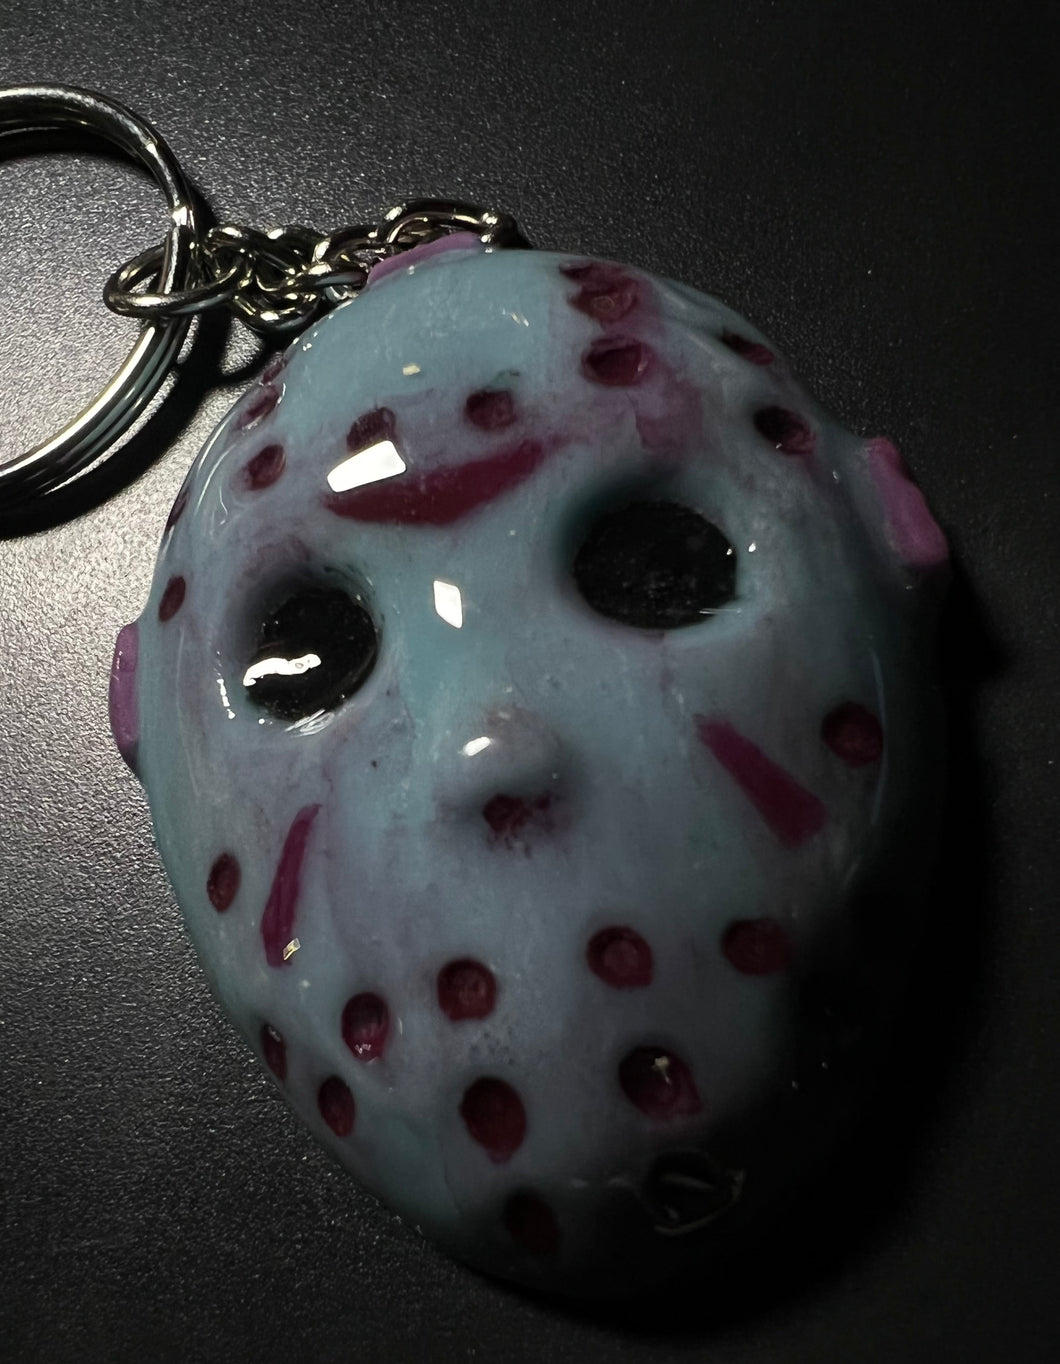 Friday the 13th Hand Bag, Key Chain, Charm for purses etc